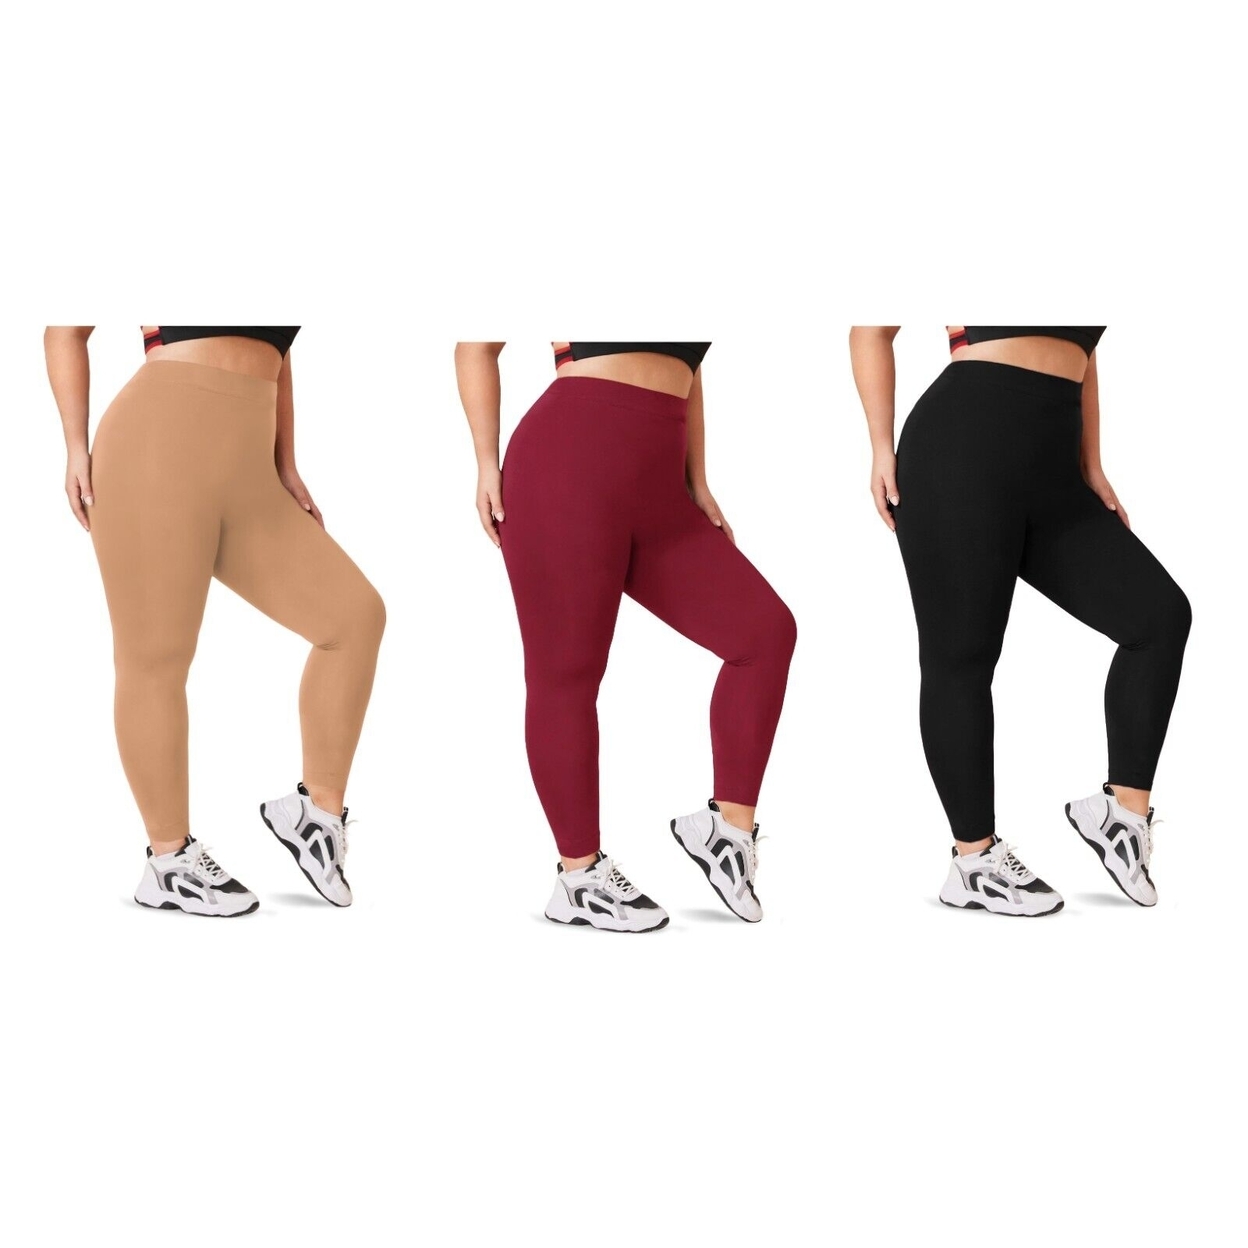 2-Pack: Women's Casual Ultra-Soft Smooth High Waisted Athletic Active Yoga Leggings Plus Size Available - Black & Black, 1x